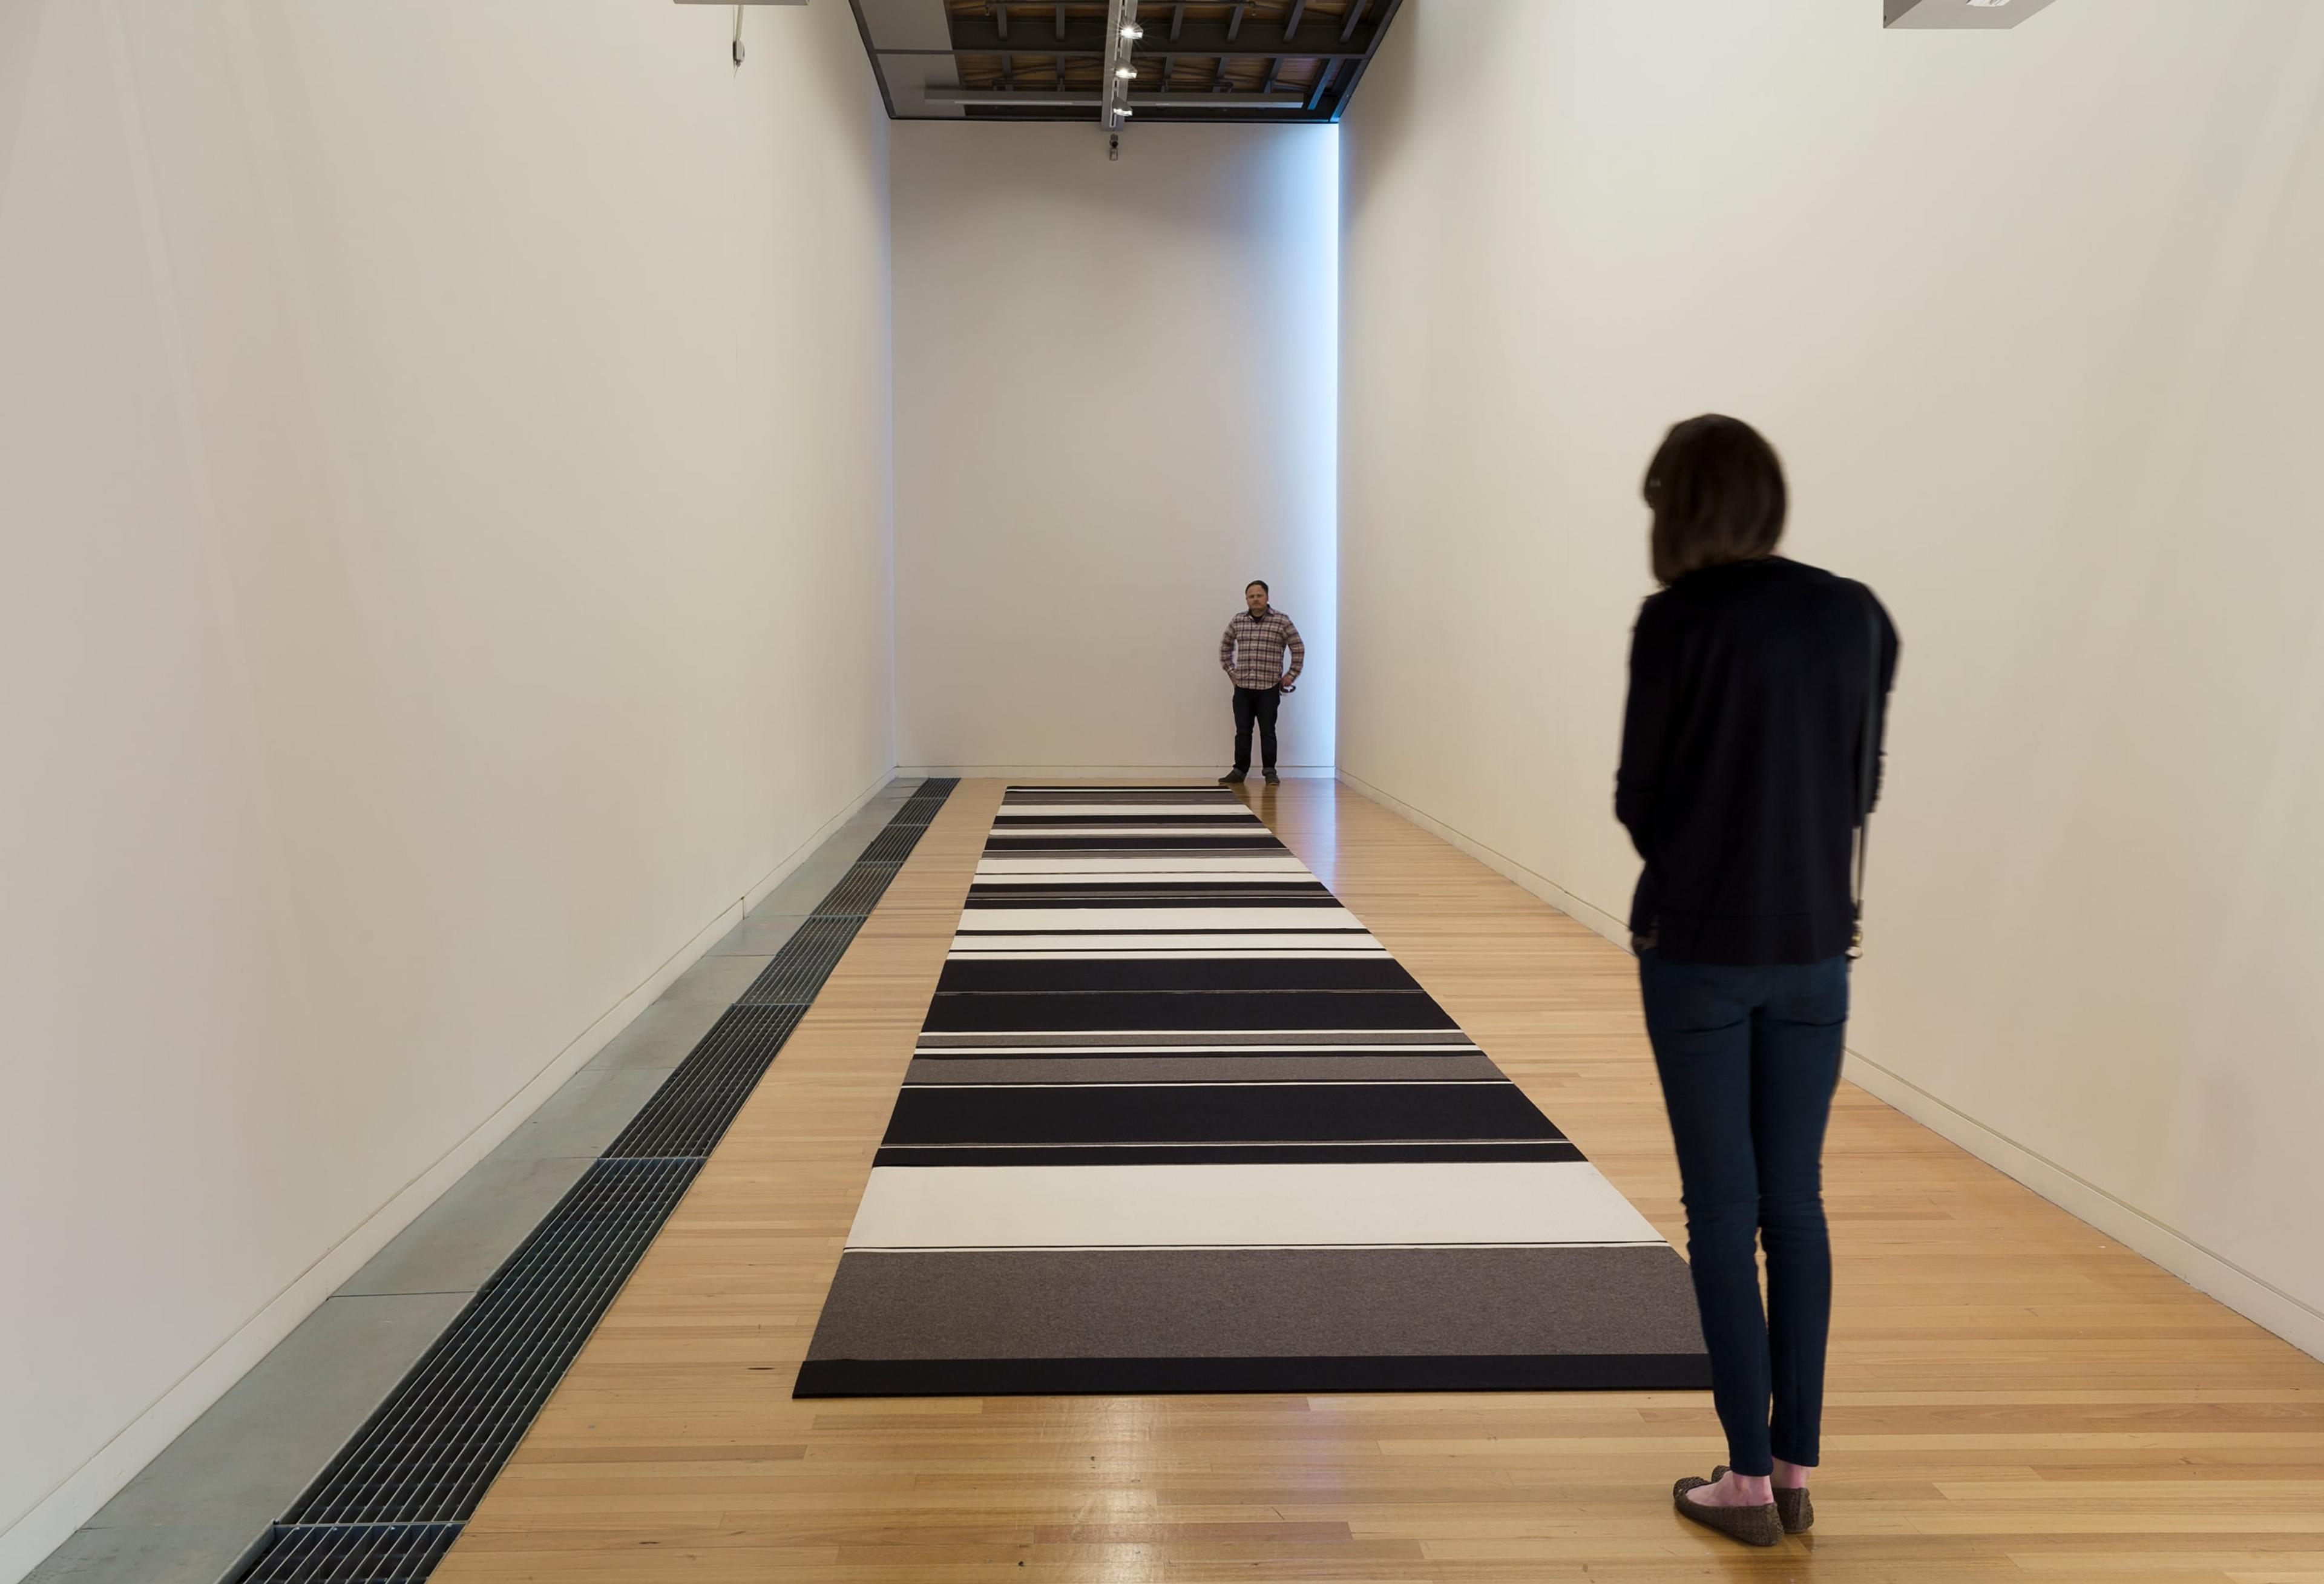 Installation view of Peter Robinson, Cuts and Junctures, 2013, cut wool felt, installation dimensions variable, at the Adam Art Gallery. Courtesy the artist and Peter McLeavey Gallery, Wellington. Photo: Shaun Waugh.